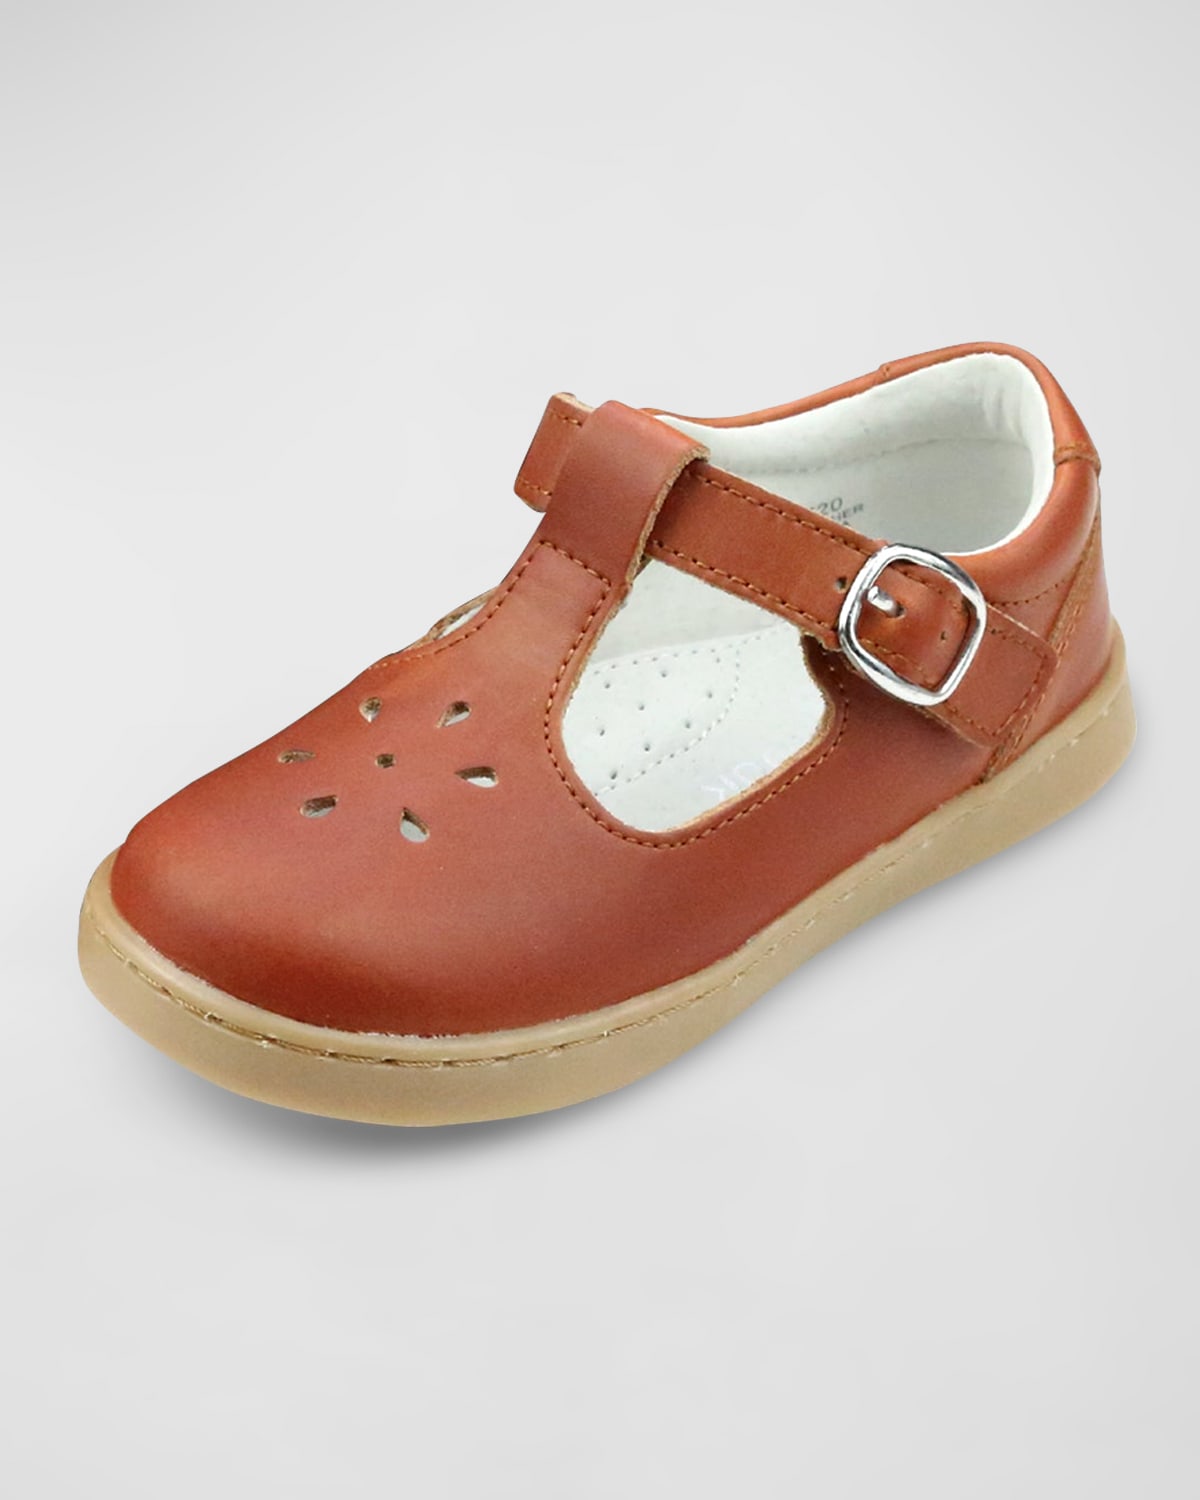 L'amour Shoes Girl's Chelsea T-strap Mary Jane Shoes, Baby/toddler/kids In Cognac